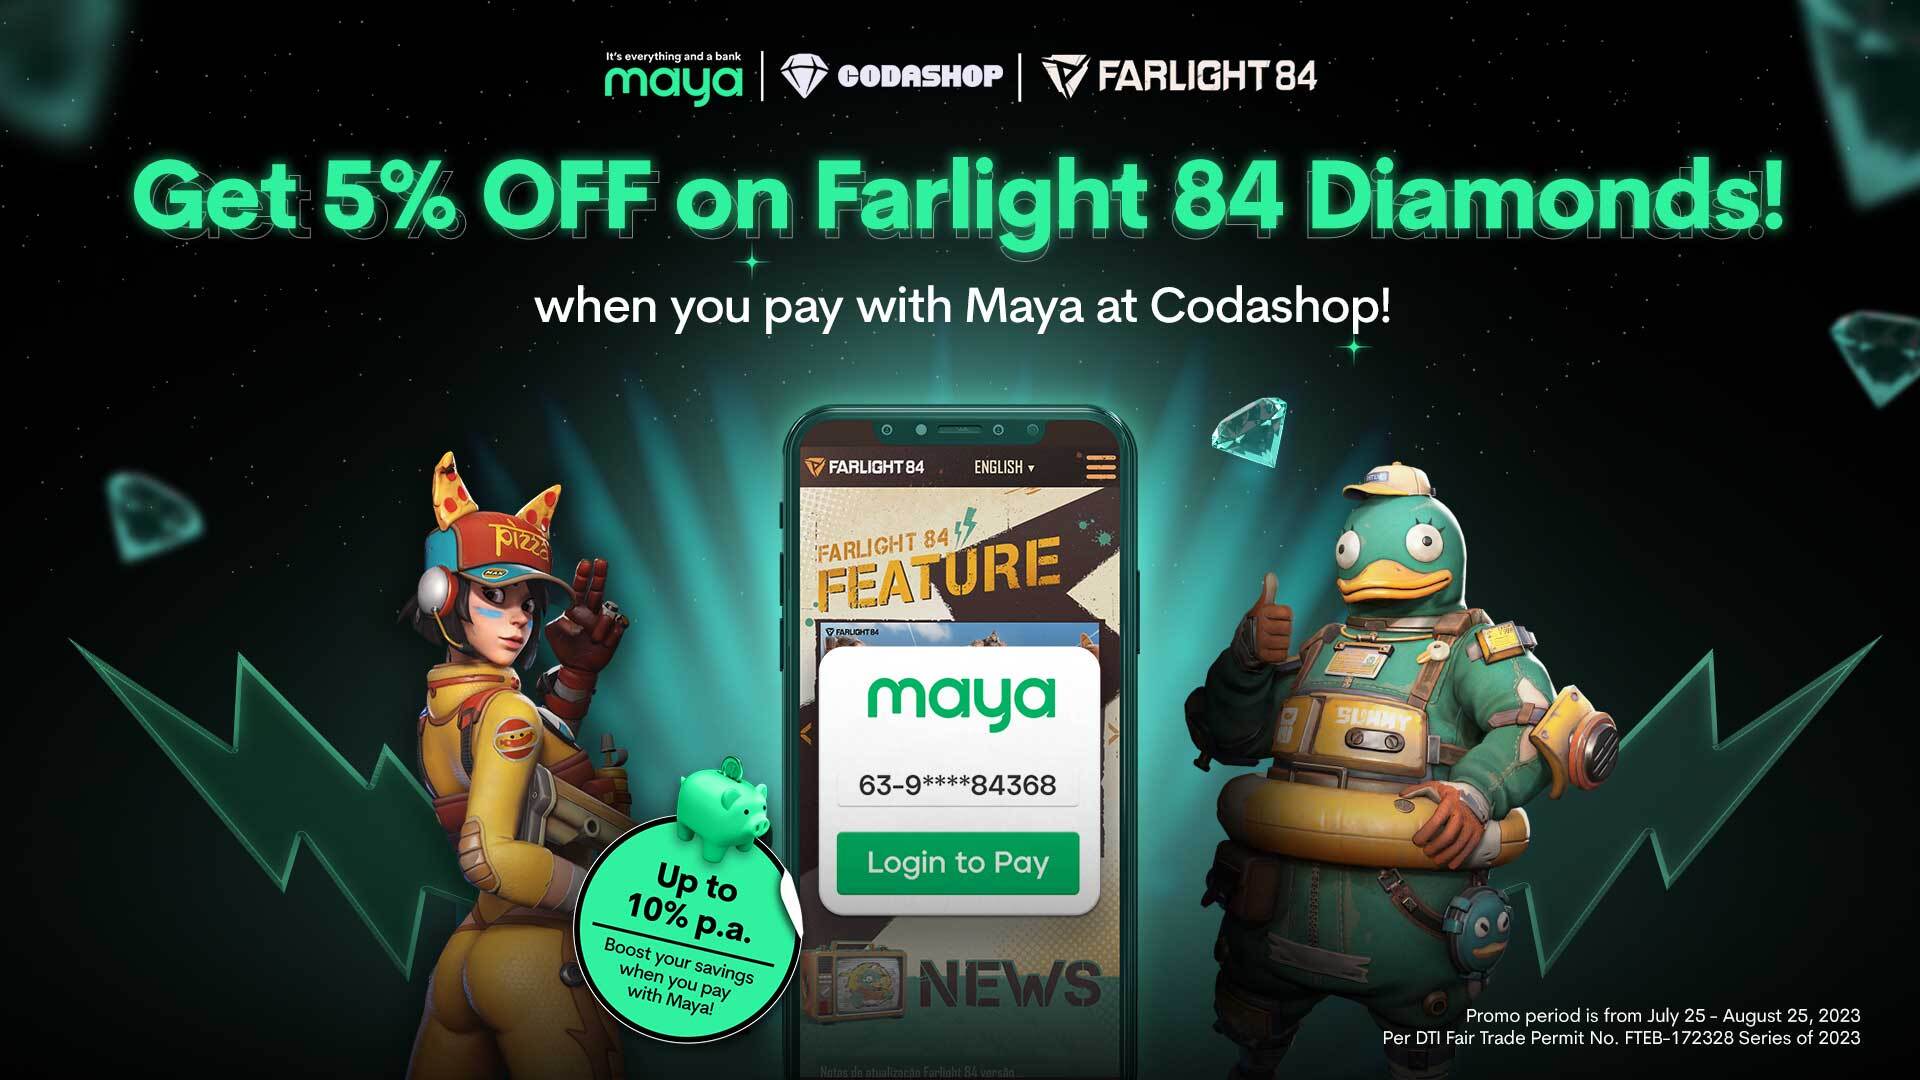 Get 5% off on Farlight 84 purchase at Codashop!